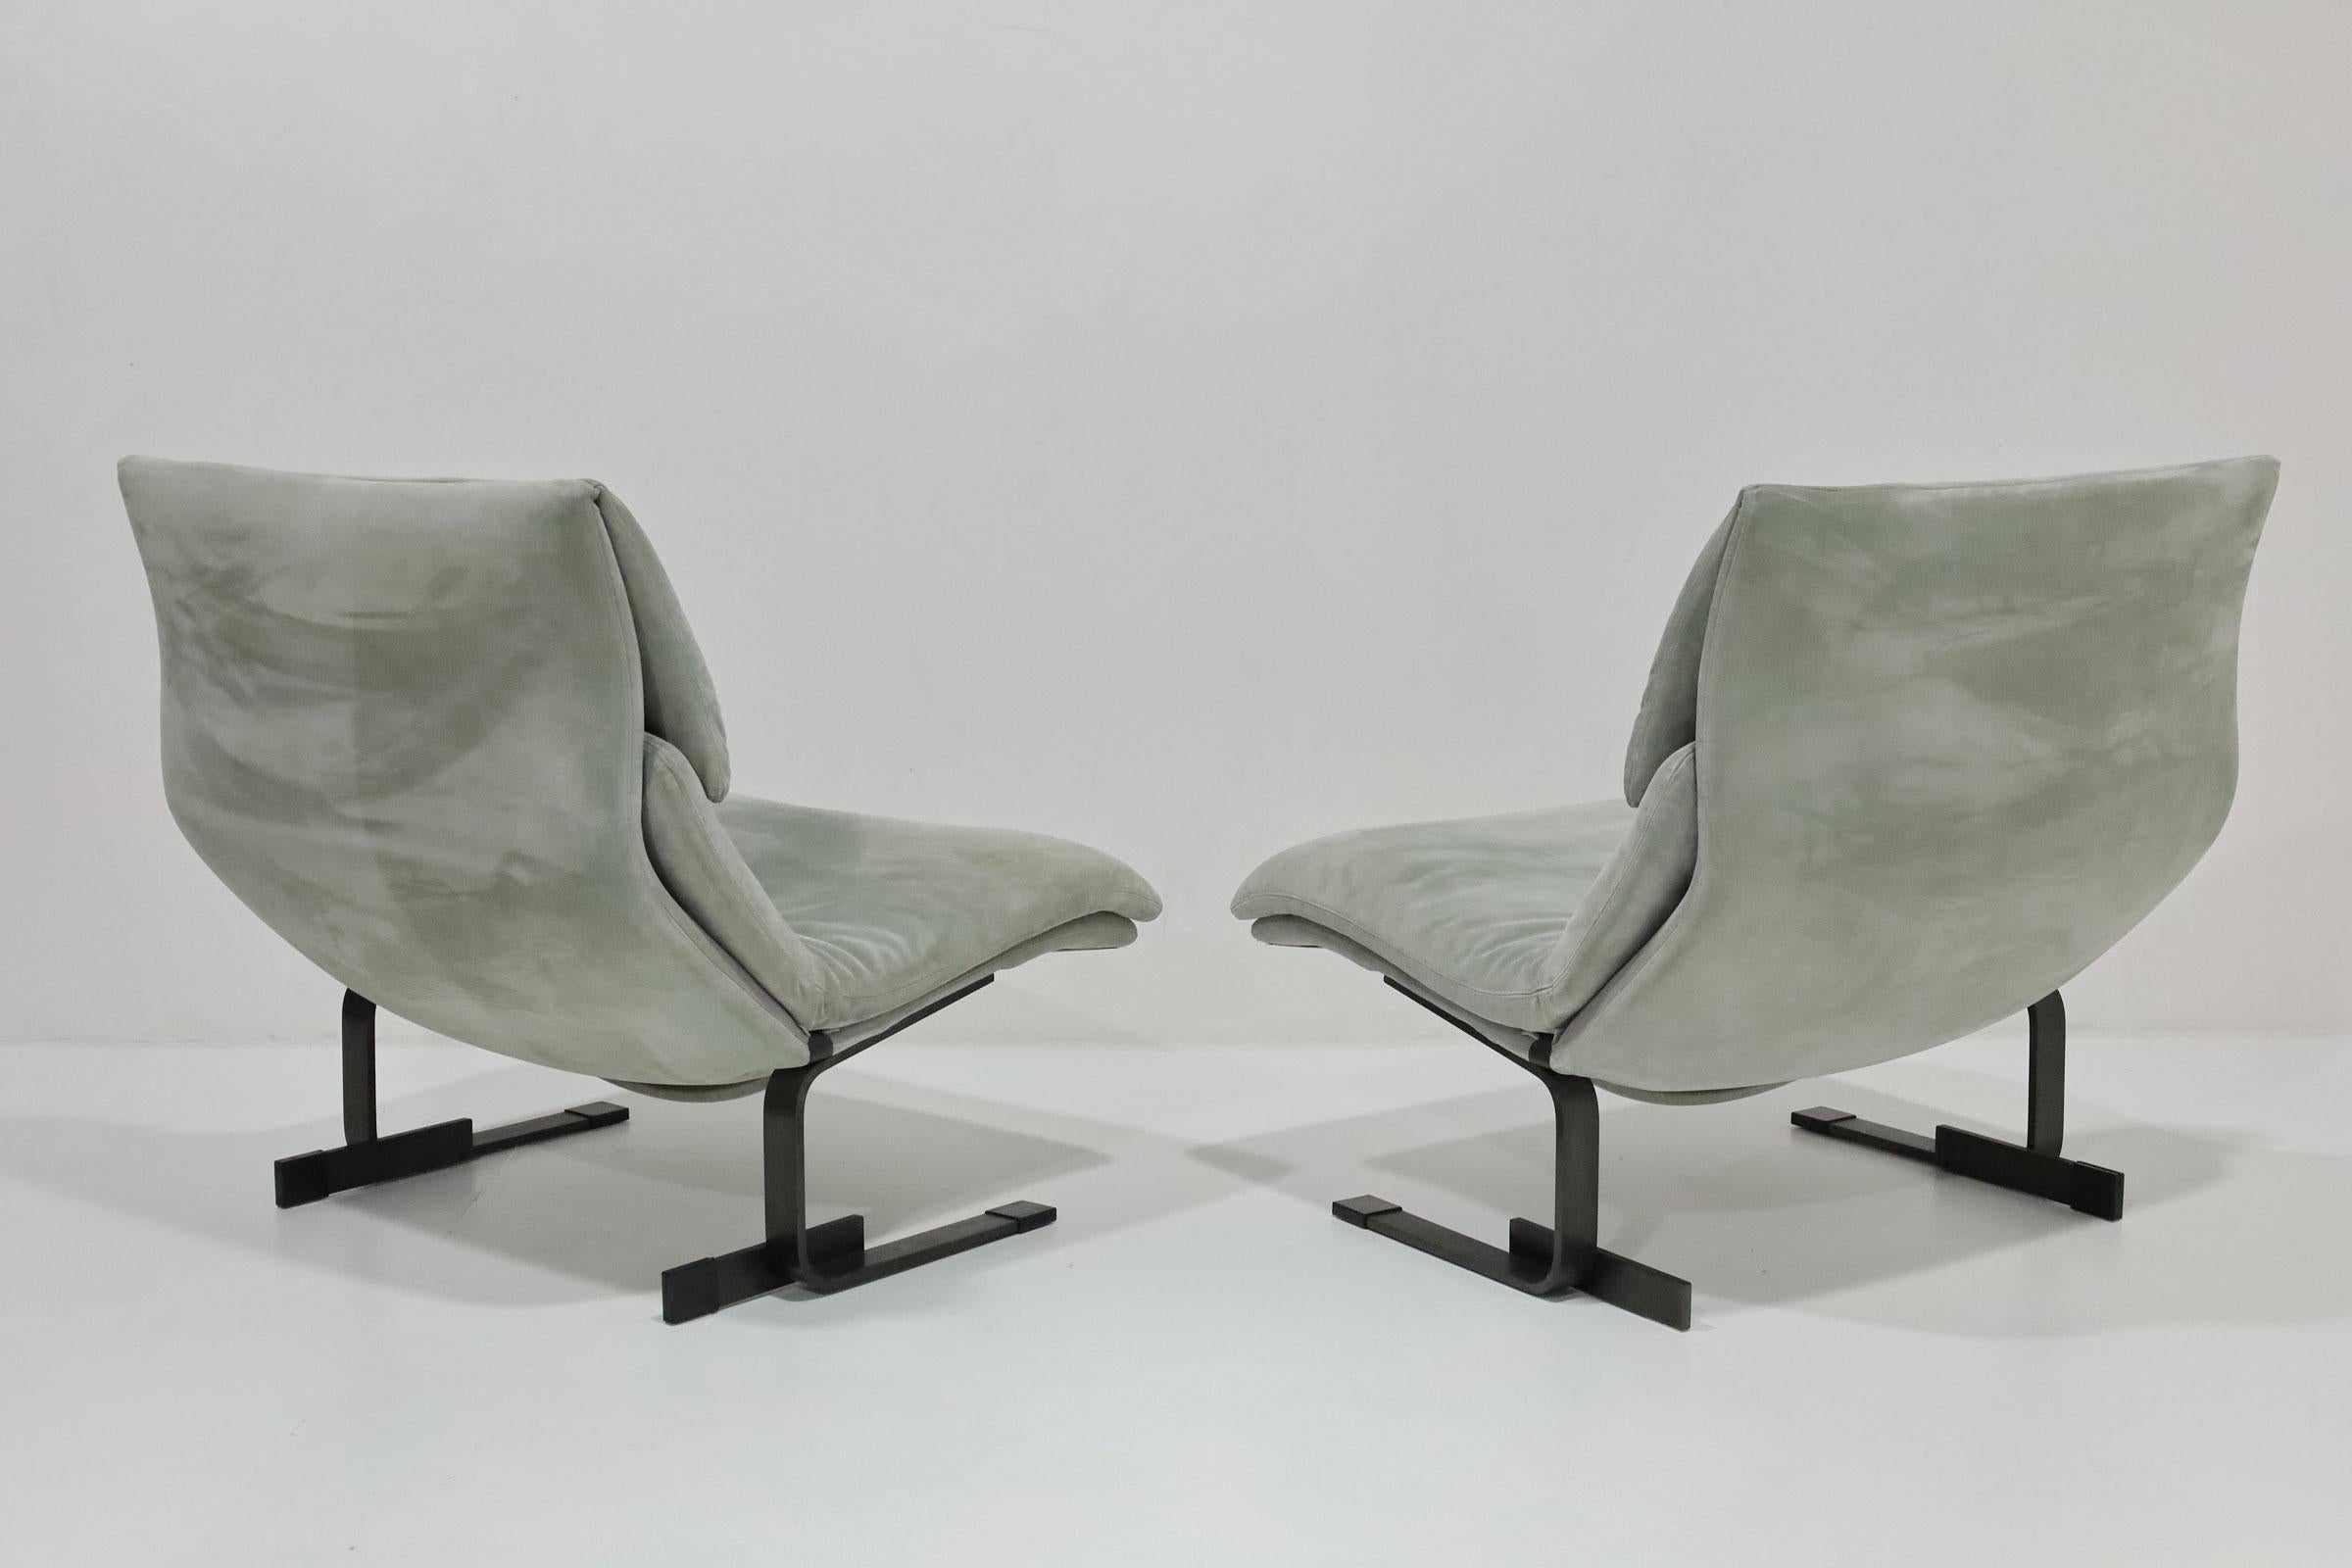 Beautiful pair of Onda Wave lounge chairs by Giovanni Offredi for Saporiti, 1970s. Chairs have a light gray suede fabric and bronze steel bases. 